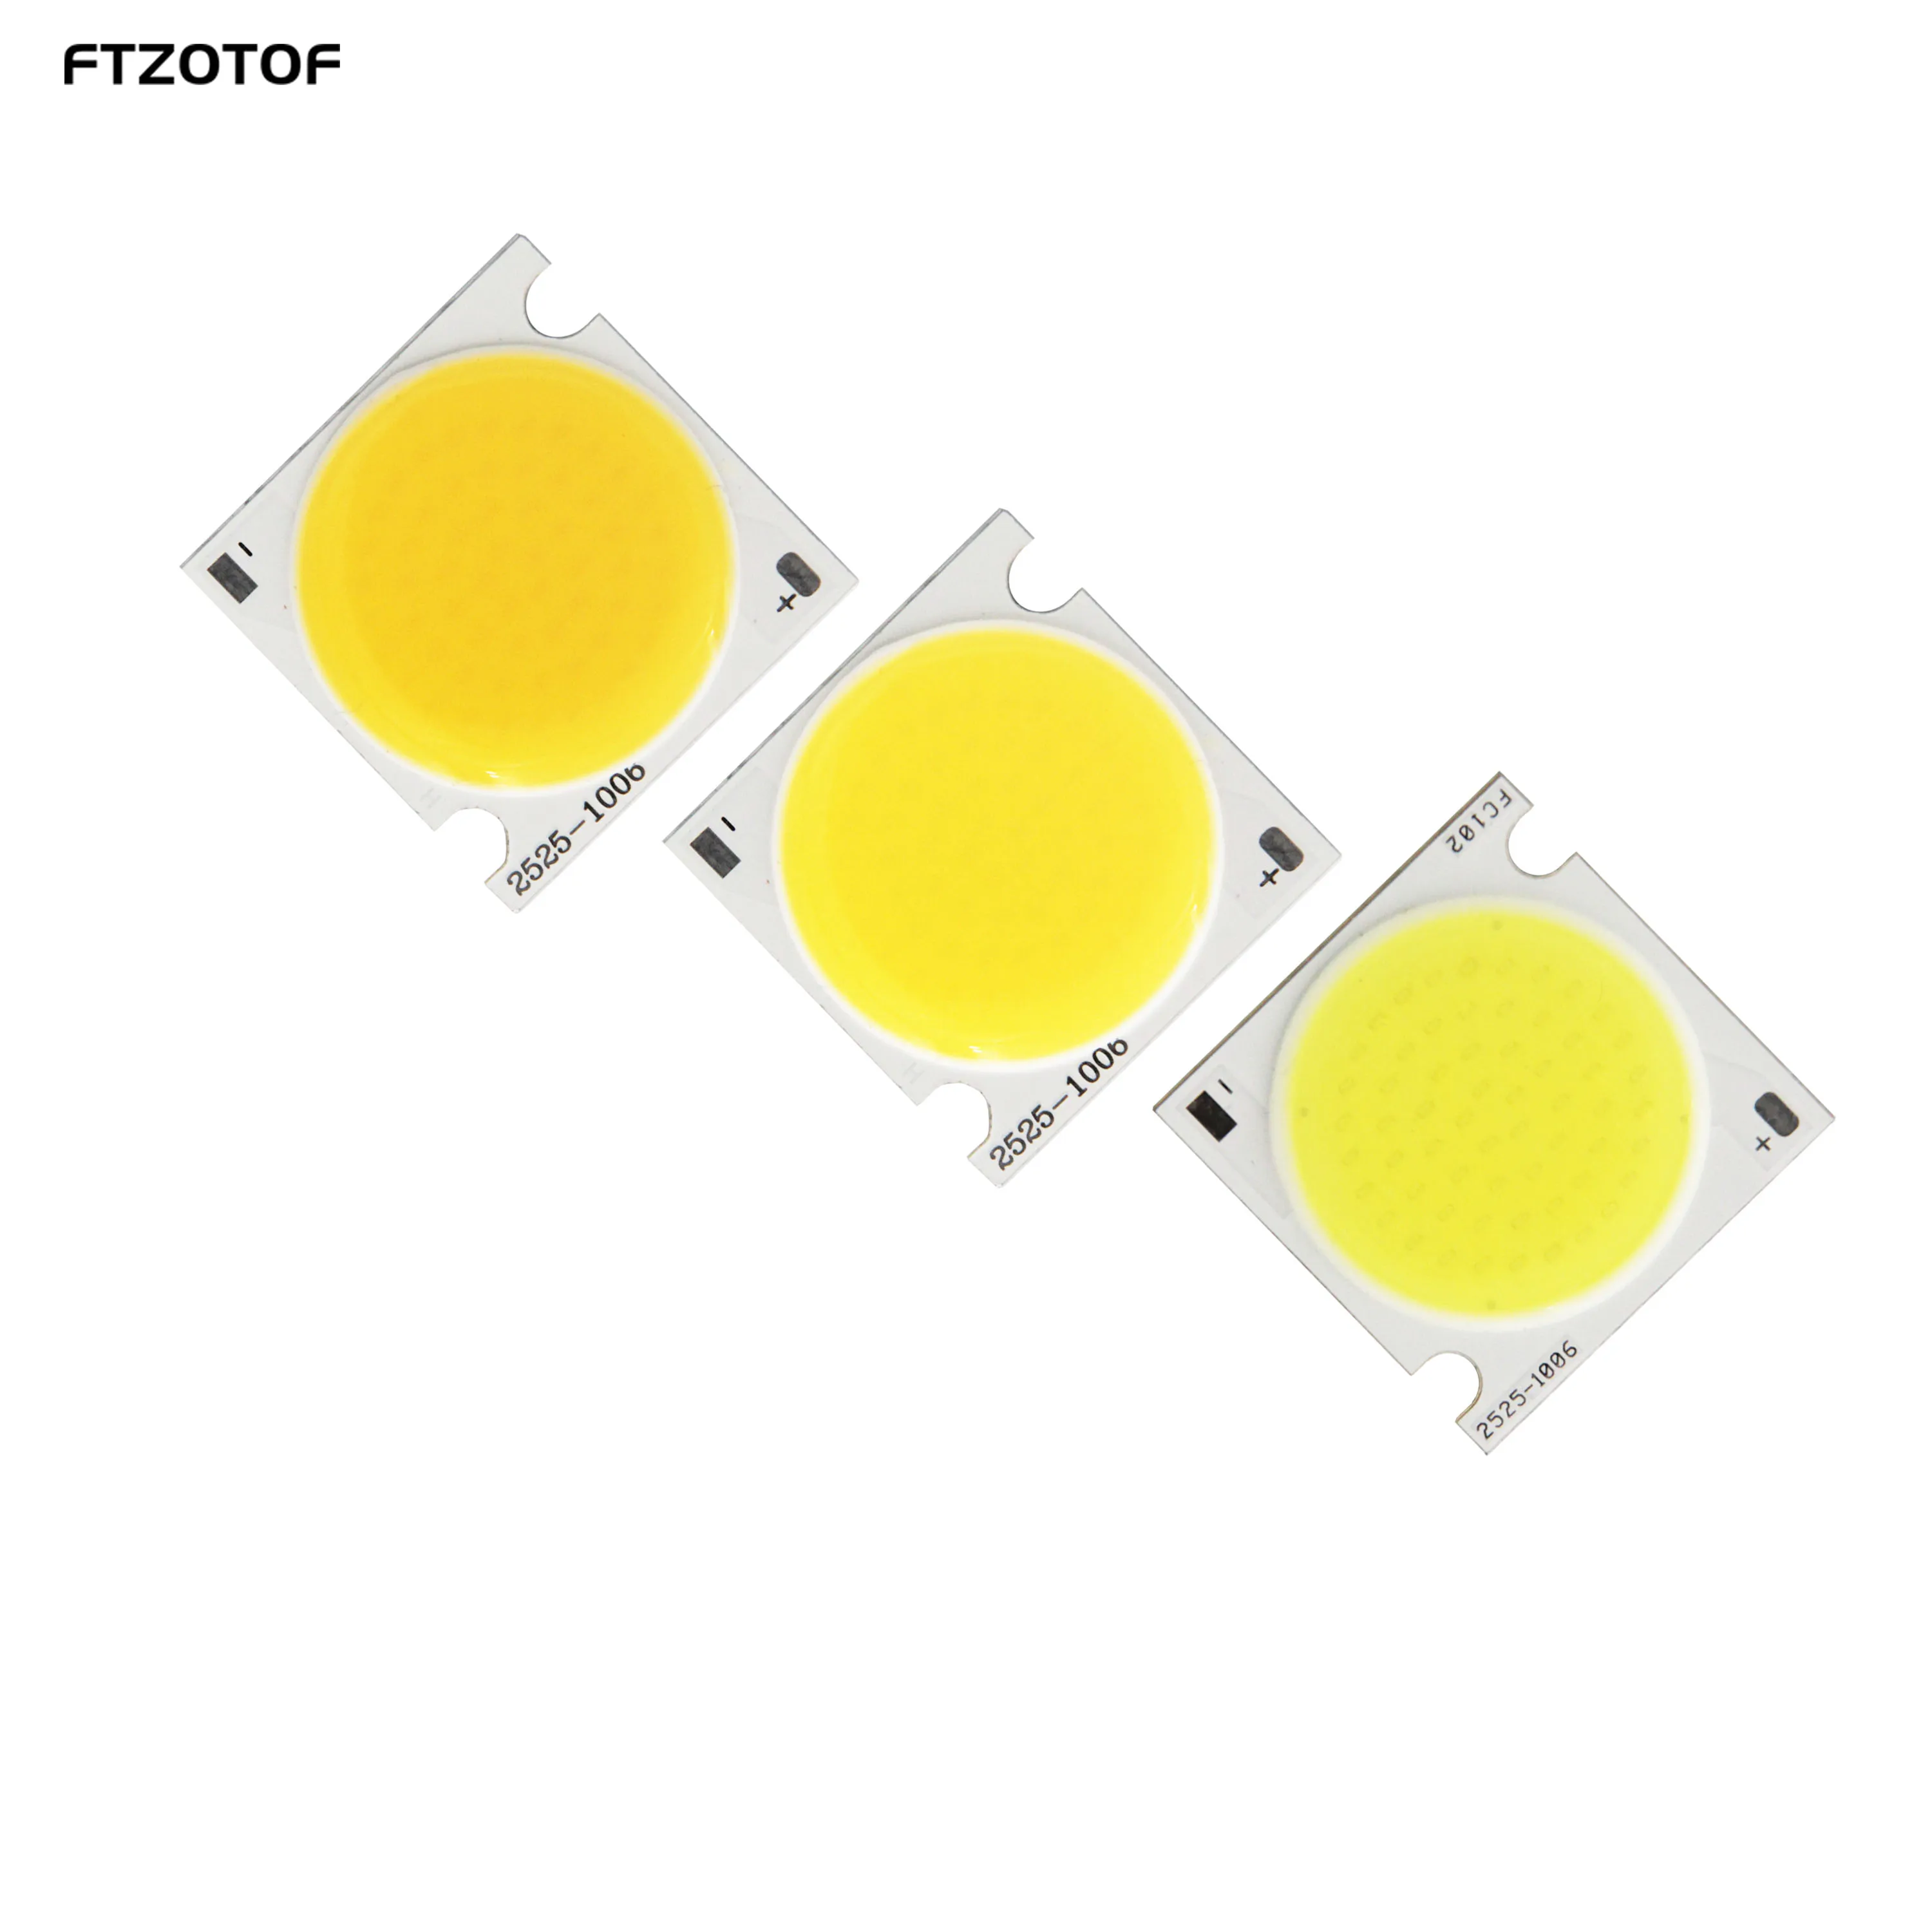 

FTZOTOF Dc 30V LED COB Light Source 20w 30w 25x25mm Bright Bulb Diode Chip Cool Warm Natural for Downlight Track Light Work Lamp